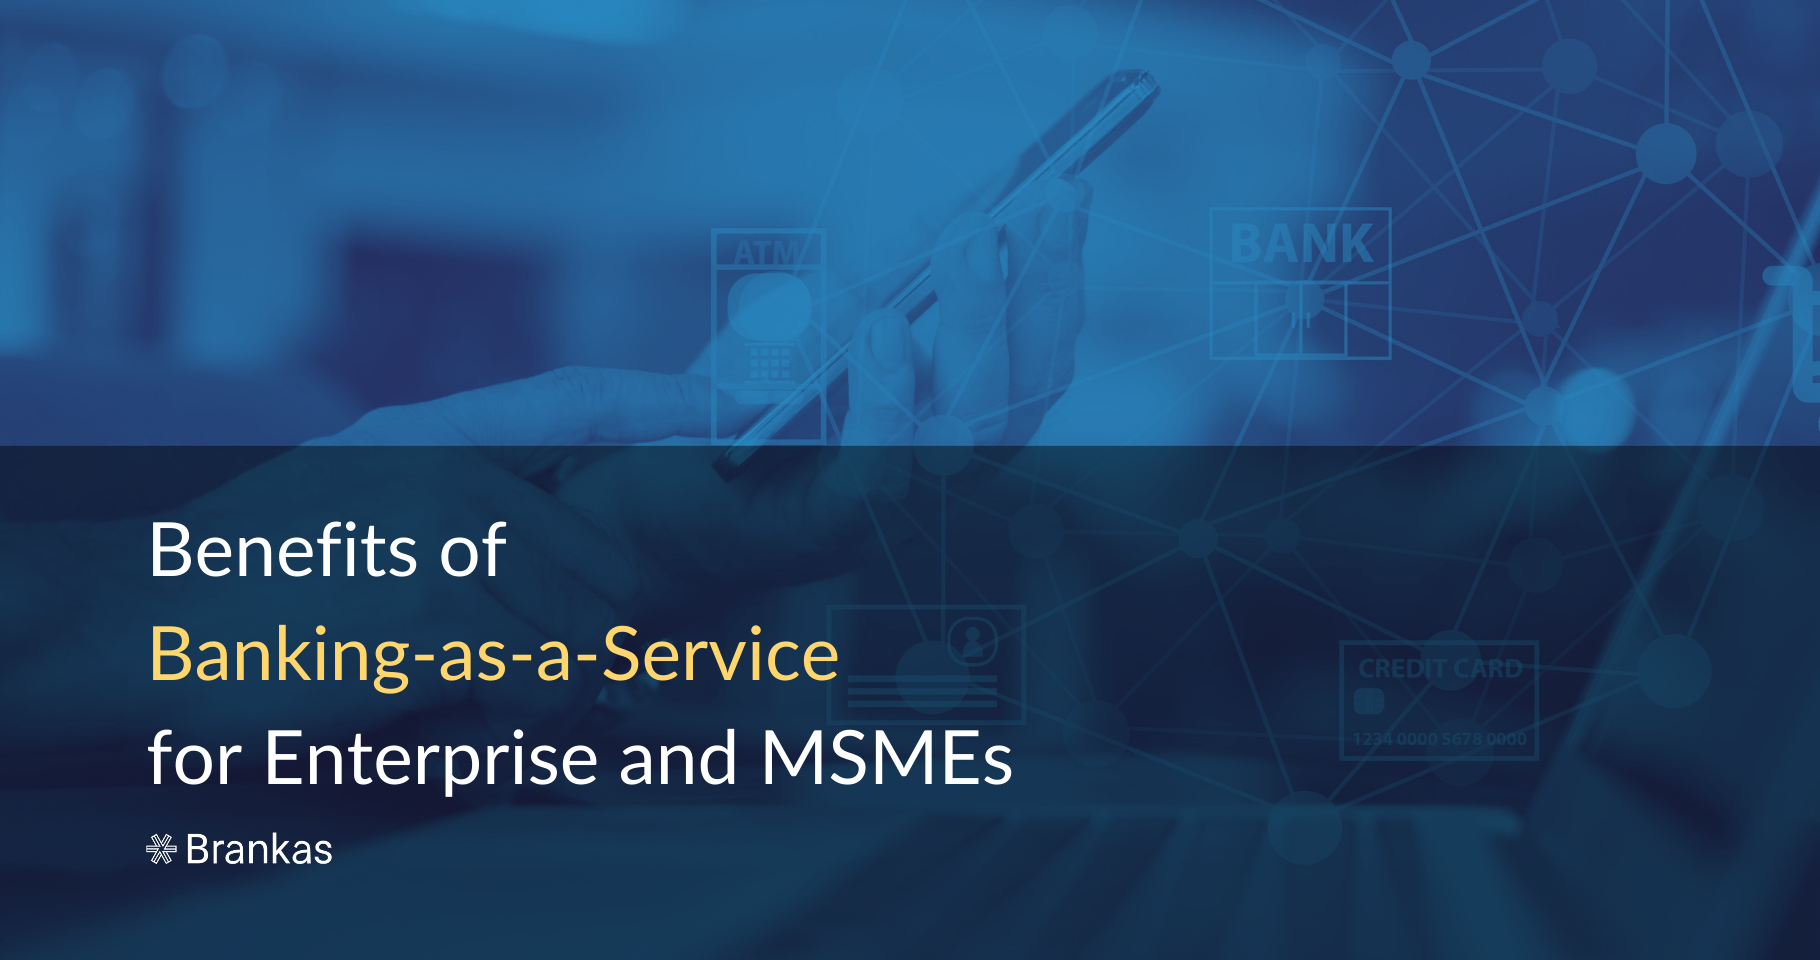 Benefits of Banking-as-a-Service for Enterprise and MSMEs